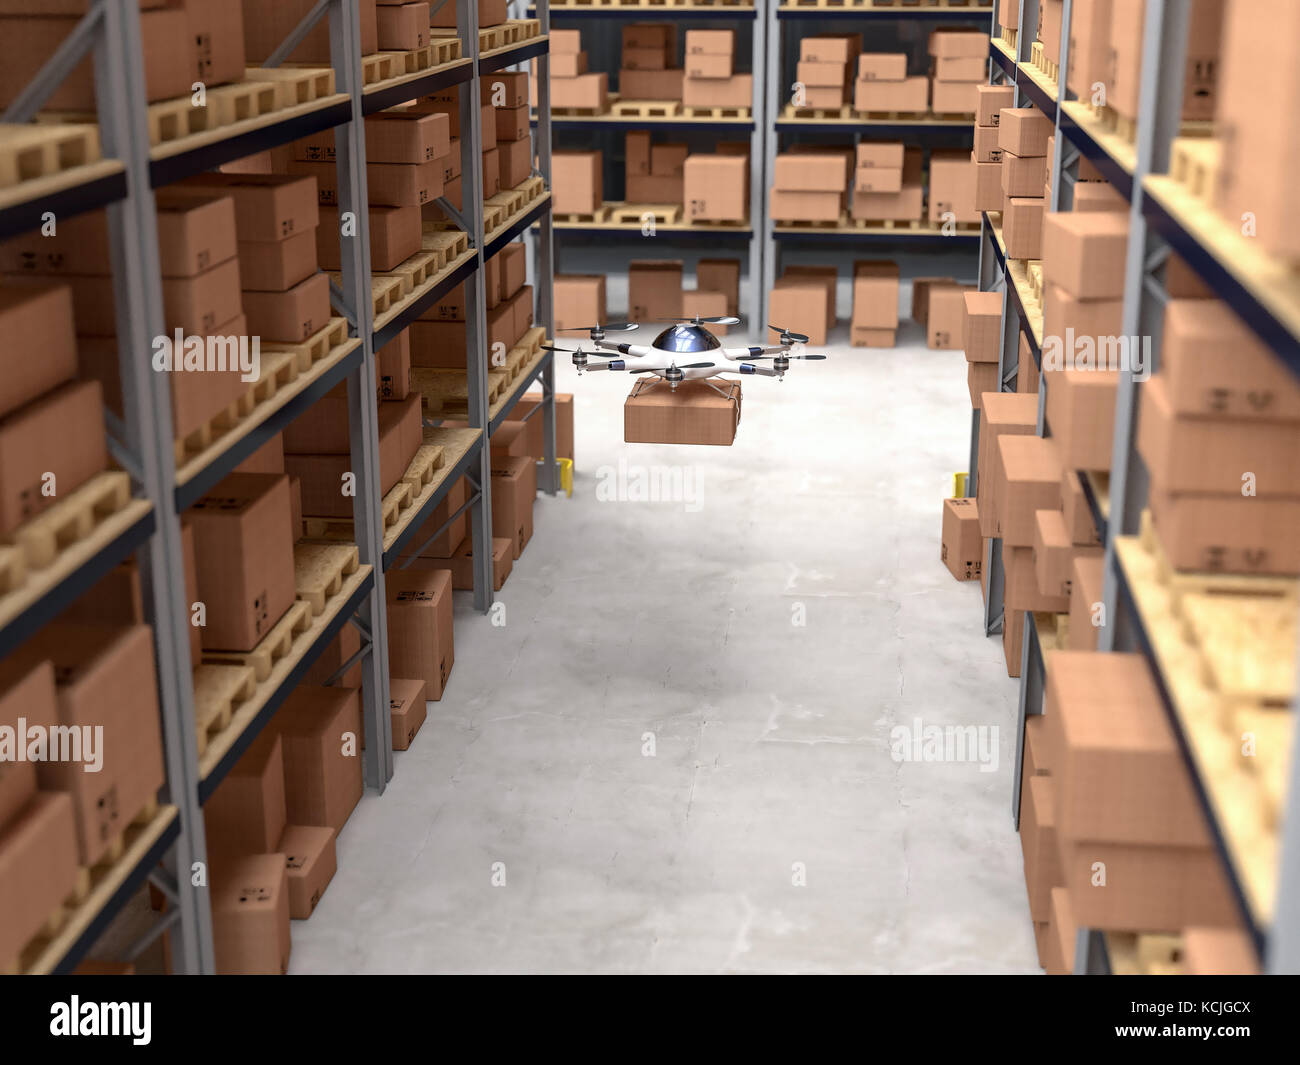 modern drone work in warehouse 3d rendering image Stock Photo